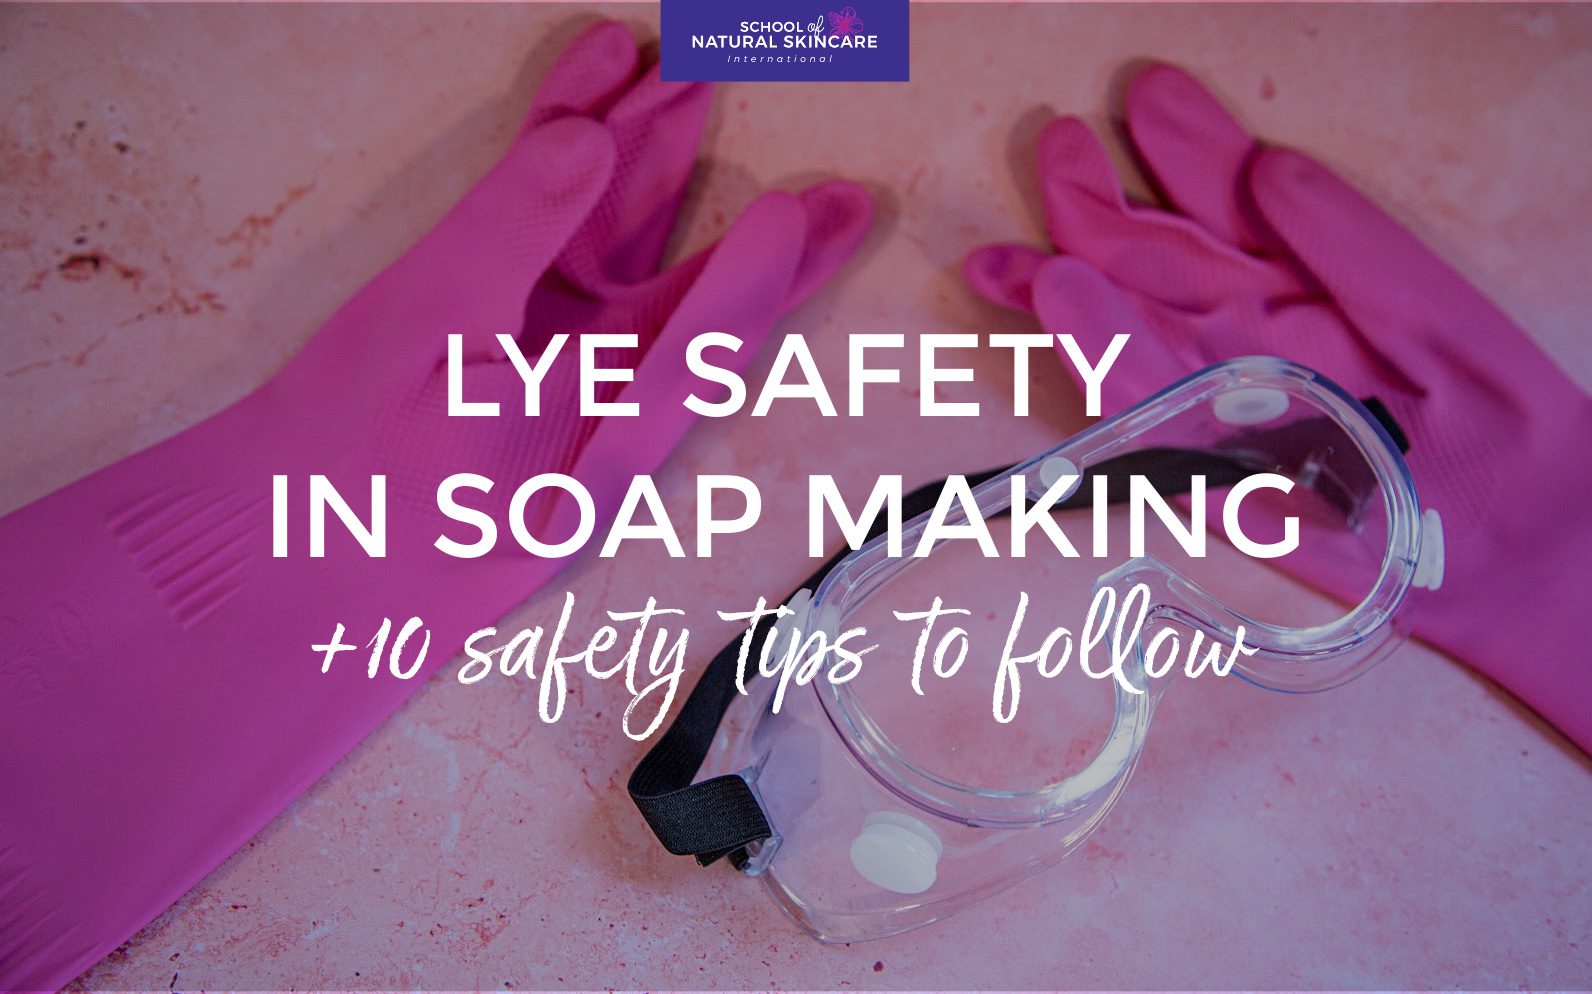 Lye Safety in Soap Making + 10 Safety Tips to Follow - School of